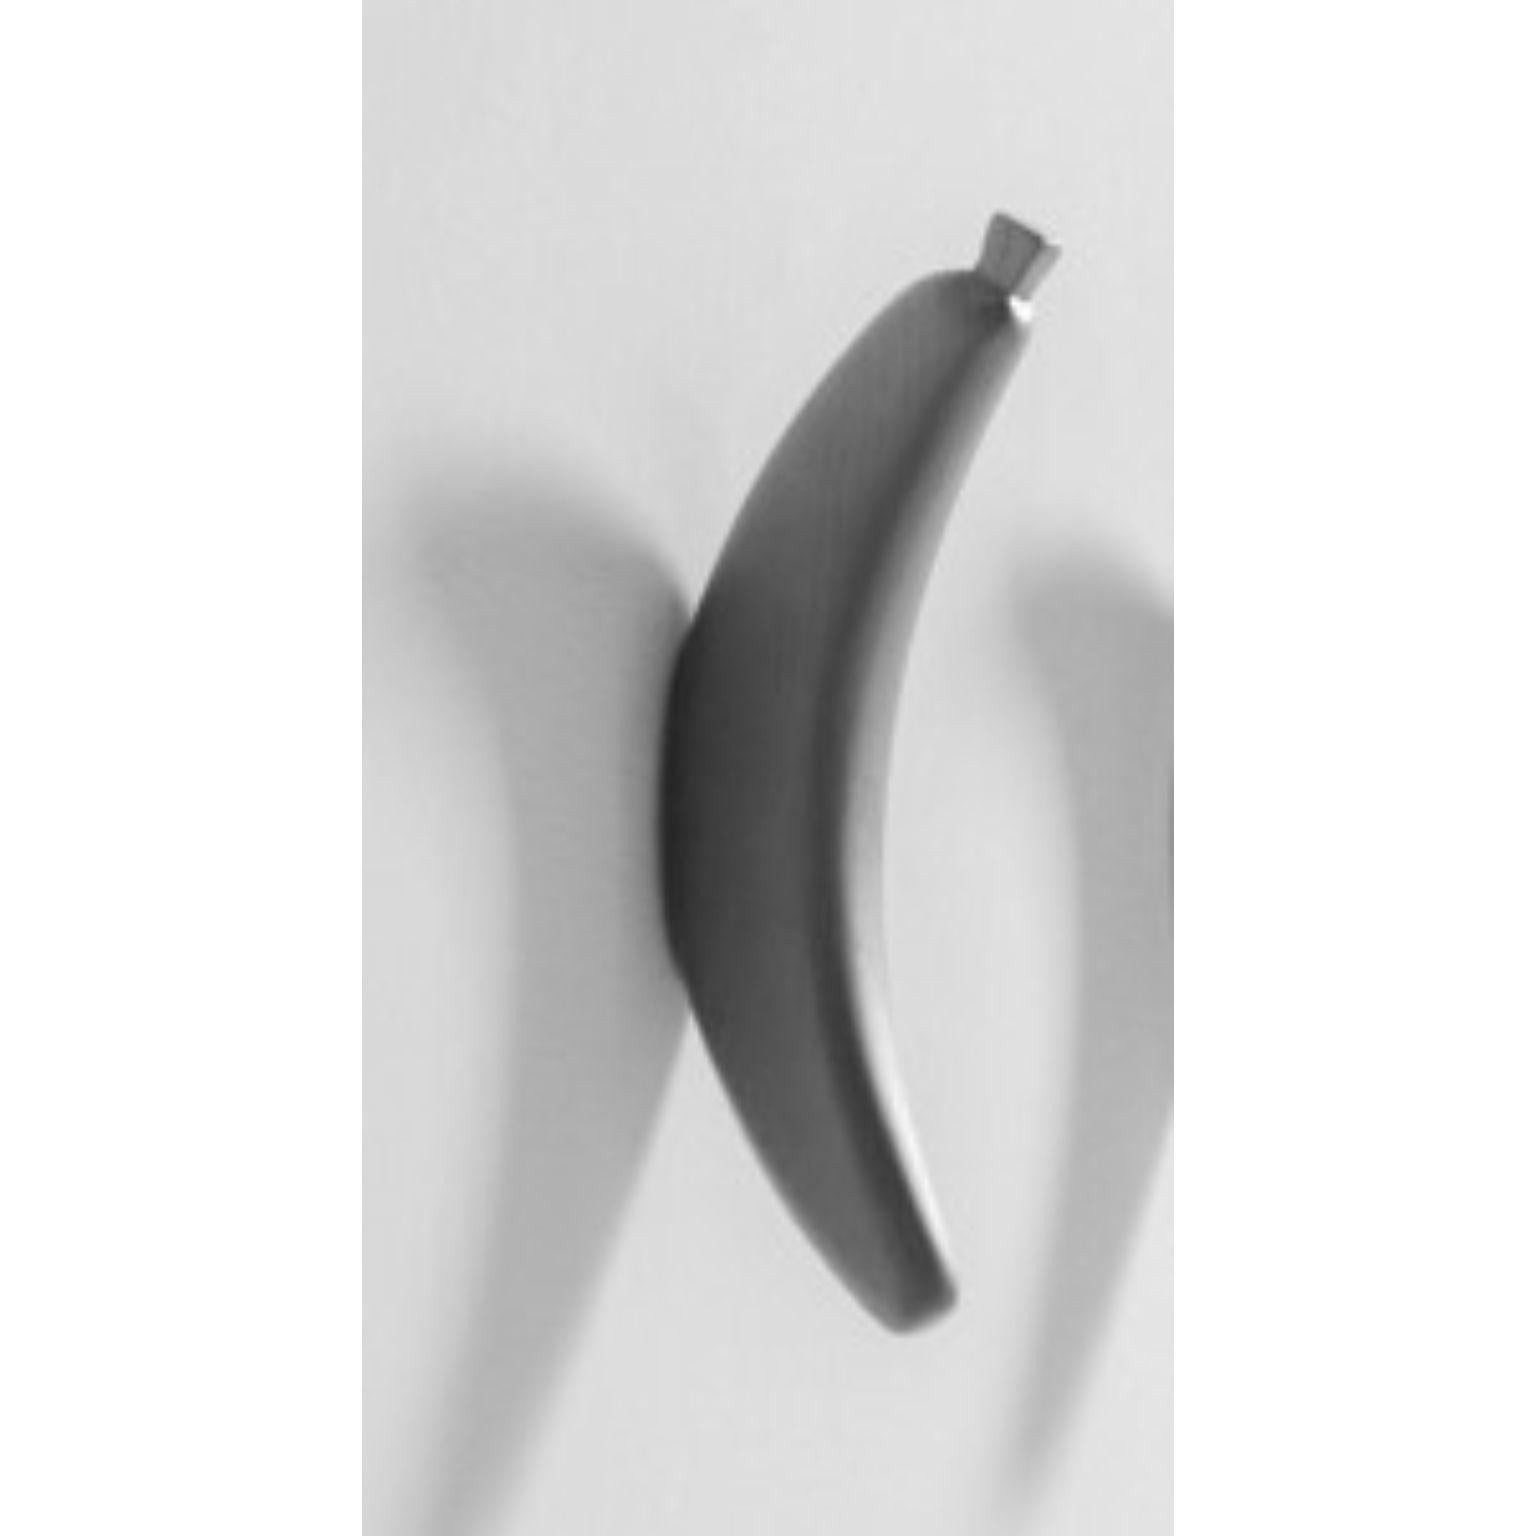 Monkey banana wall hanger by Jaime Hayon
Dimensions: D4 x 8 x H23 cm 
Materials: Ash
Also available in different colours: grey, black or yellow

«We all want what can fall from above to be something good. For me, there’s nothing better than